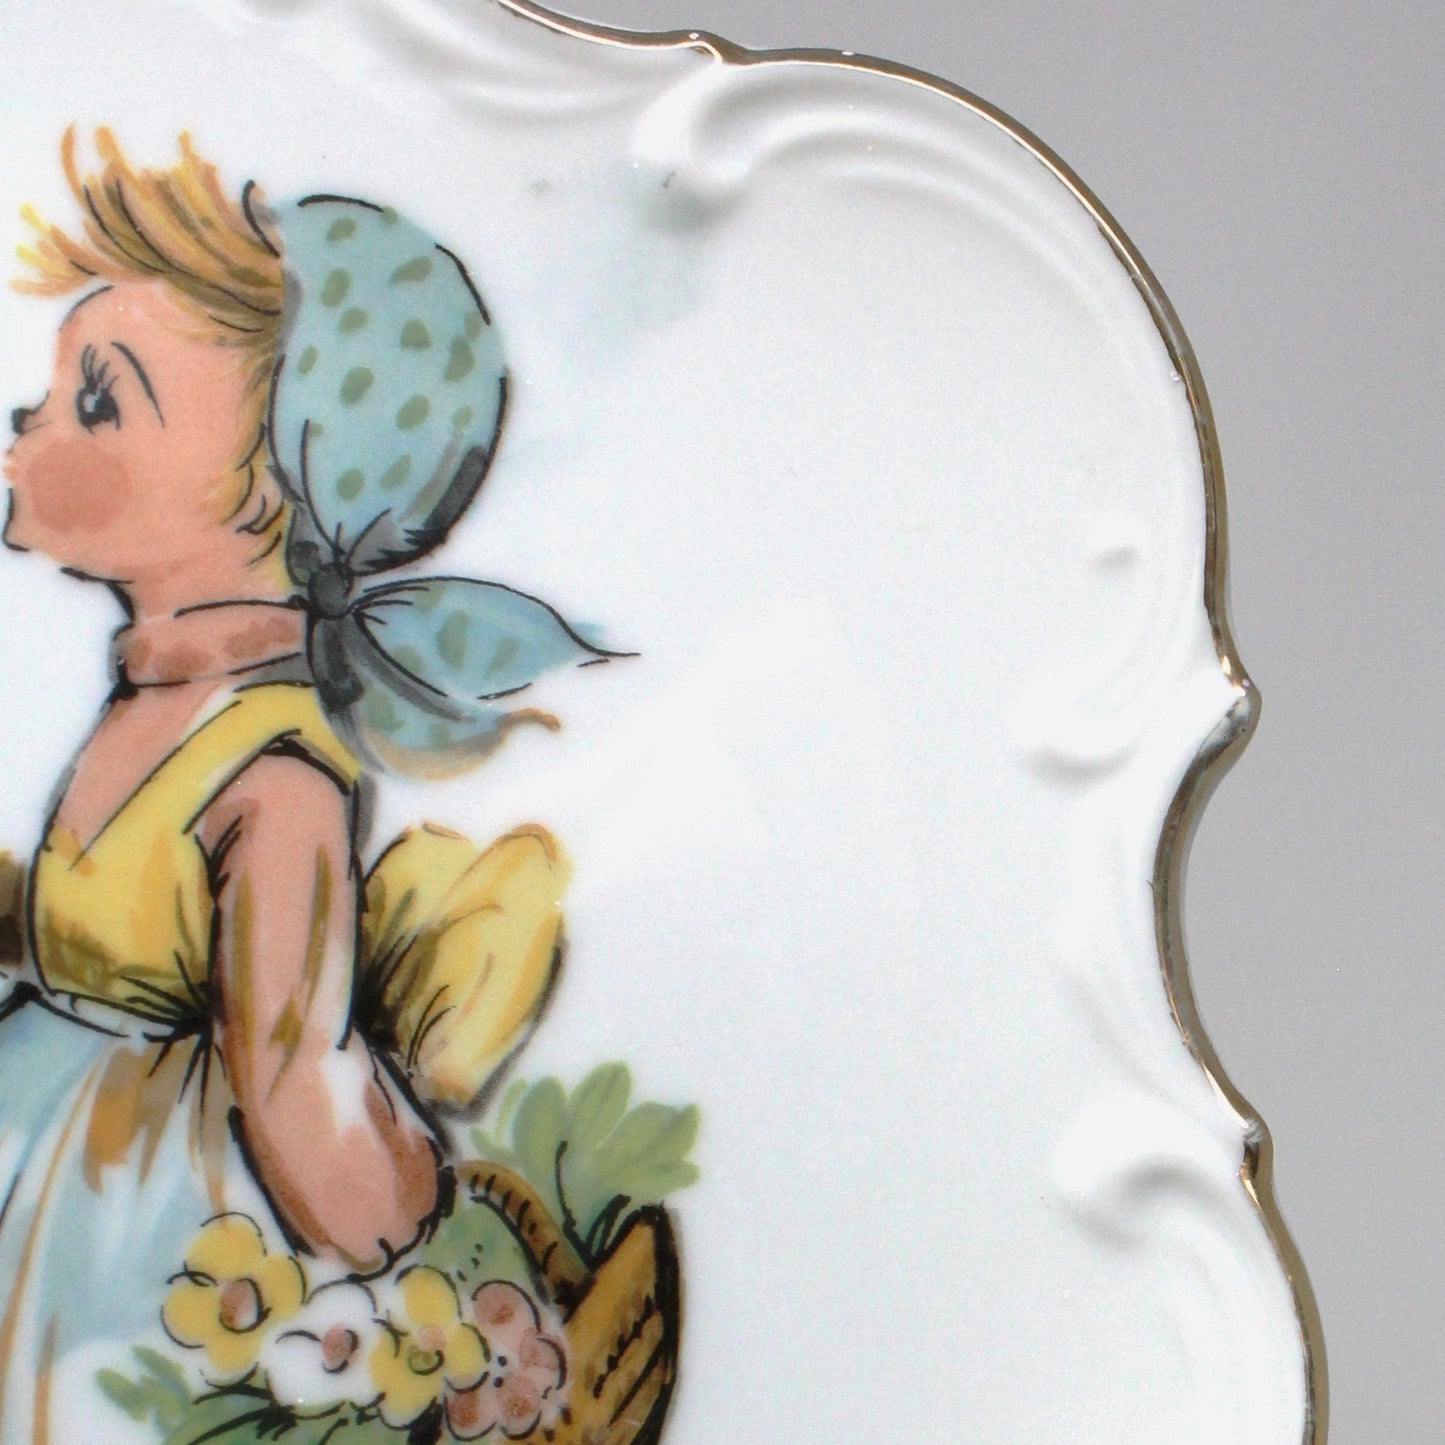 Decorative Plate, Hand Painted Hummel Style Girl in Blue Headscarf, Vintage